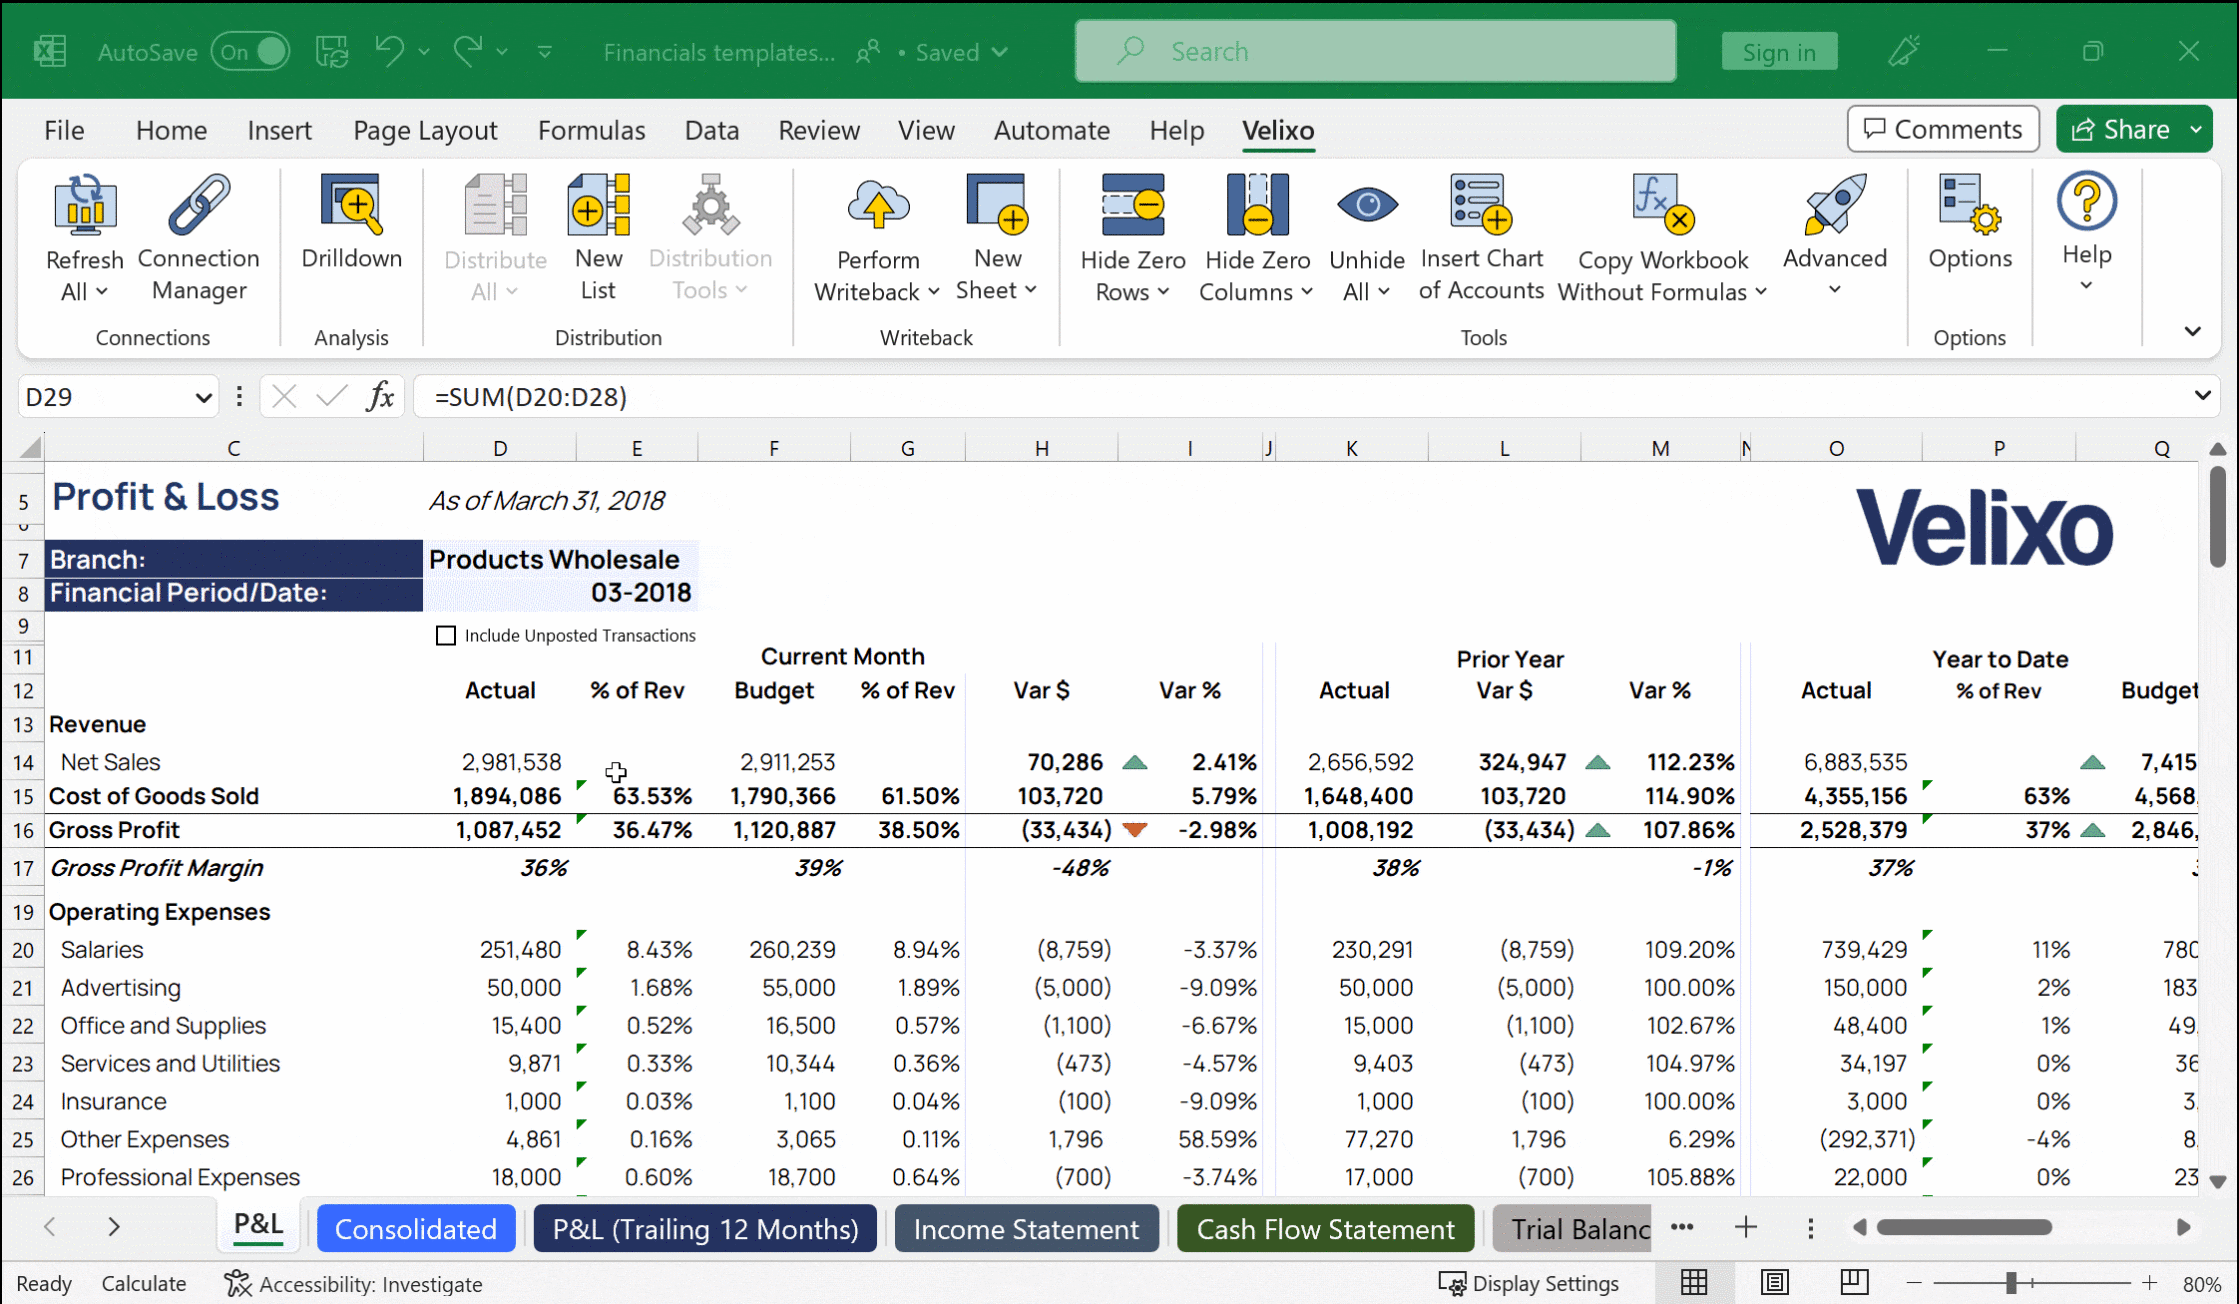 Excel Reporting Budgeting And Automation For Sage Intacct Velixo 3021